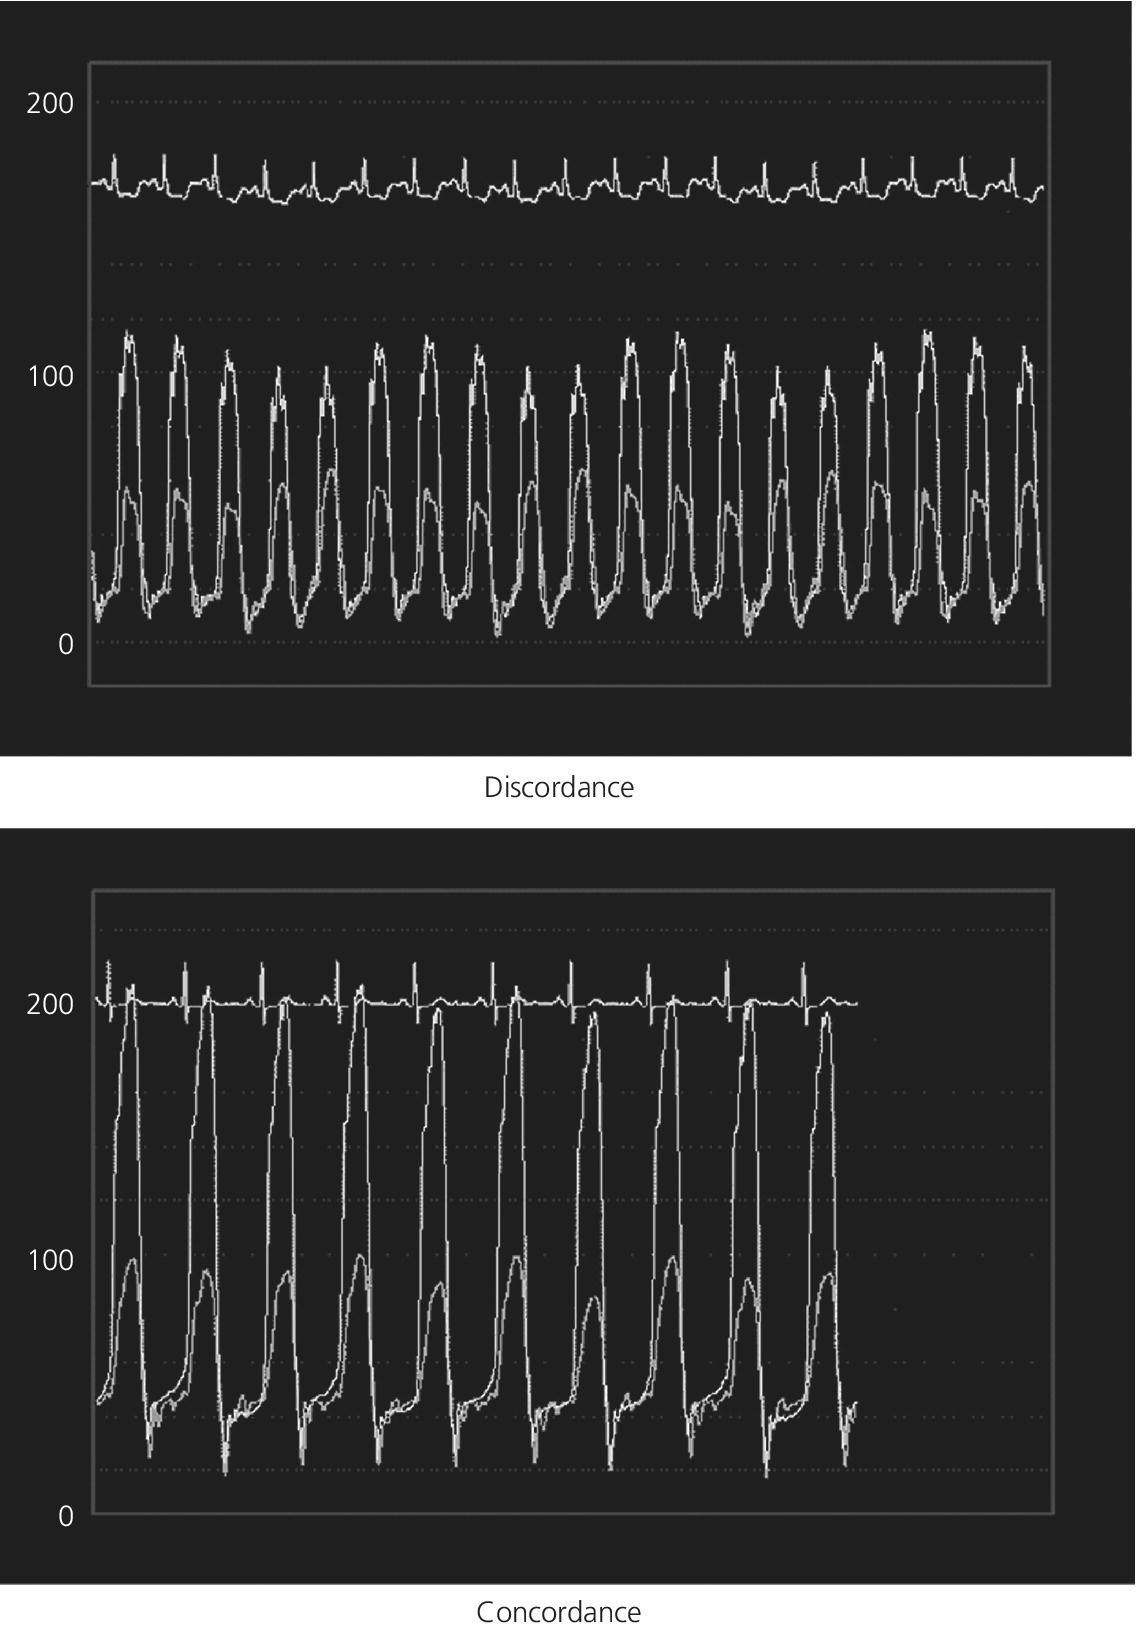 Two electrocardiograms displaying discordance (top) and concordance (bottom).